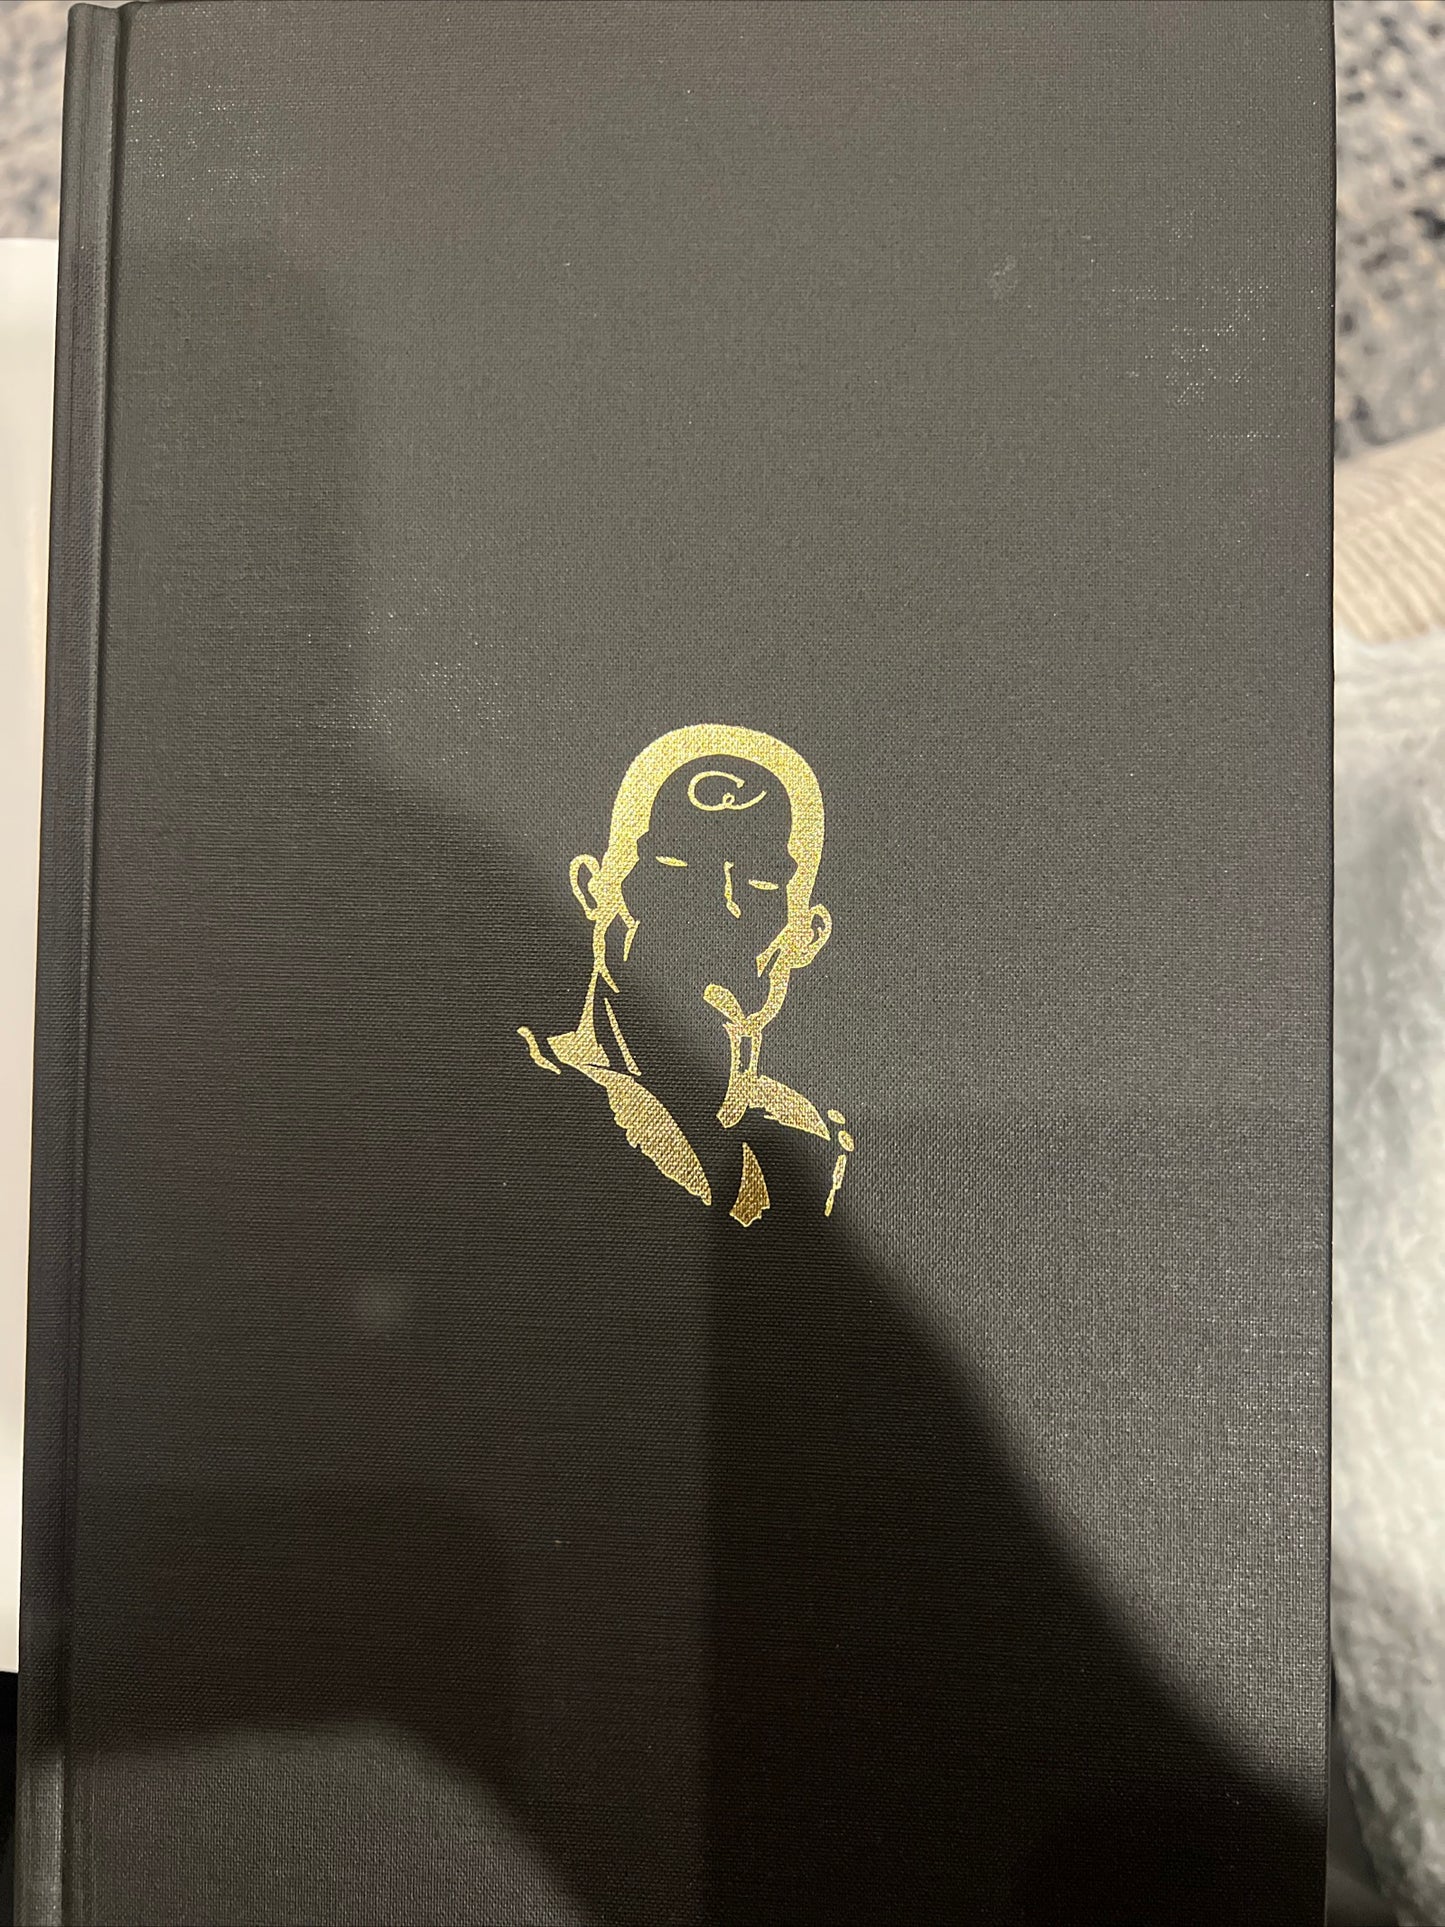 Weapon Brown Hardcover Omega Edition Signed by Jason Yungbluth (855/1000 Printed)